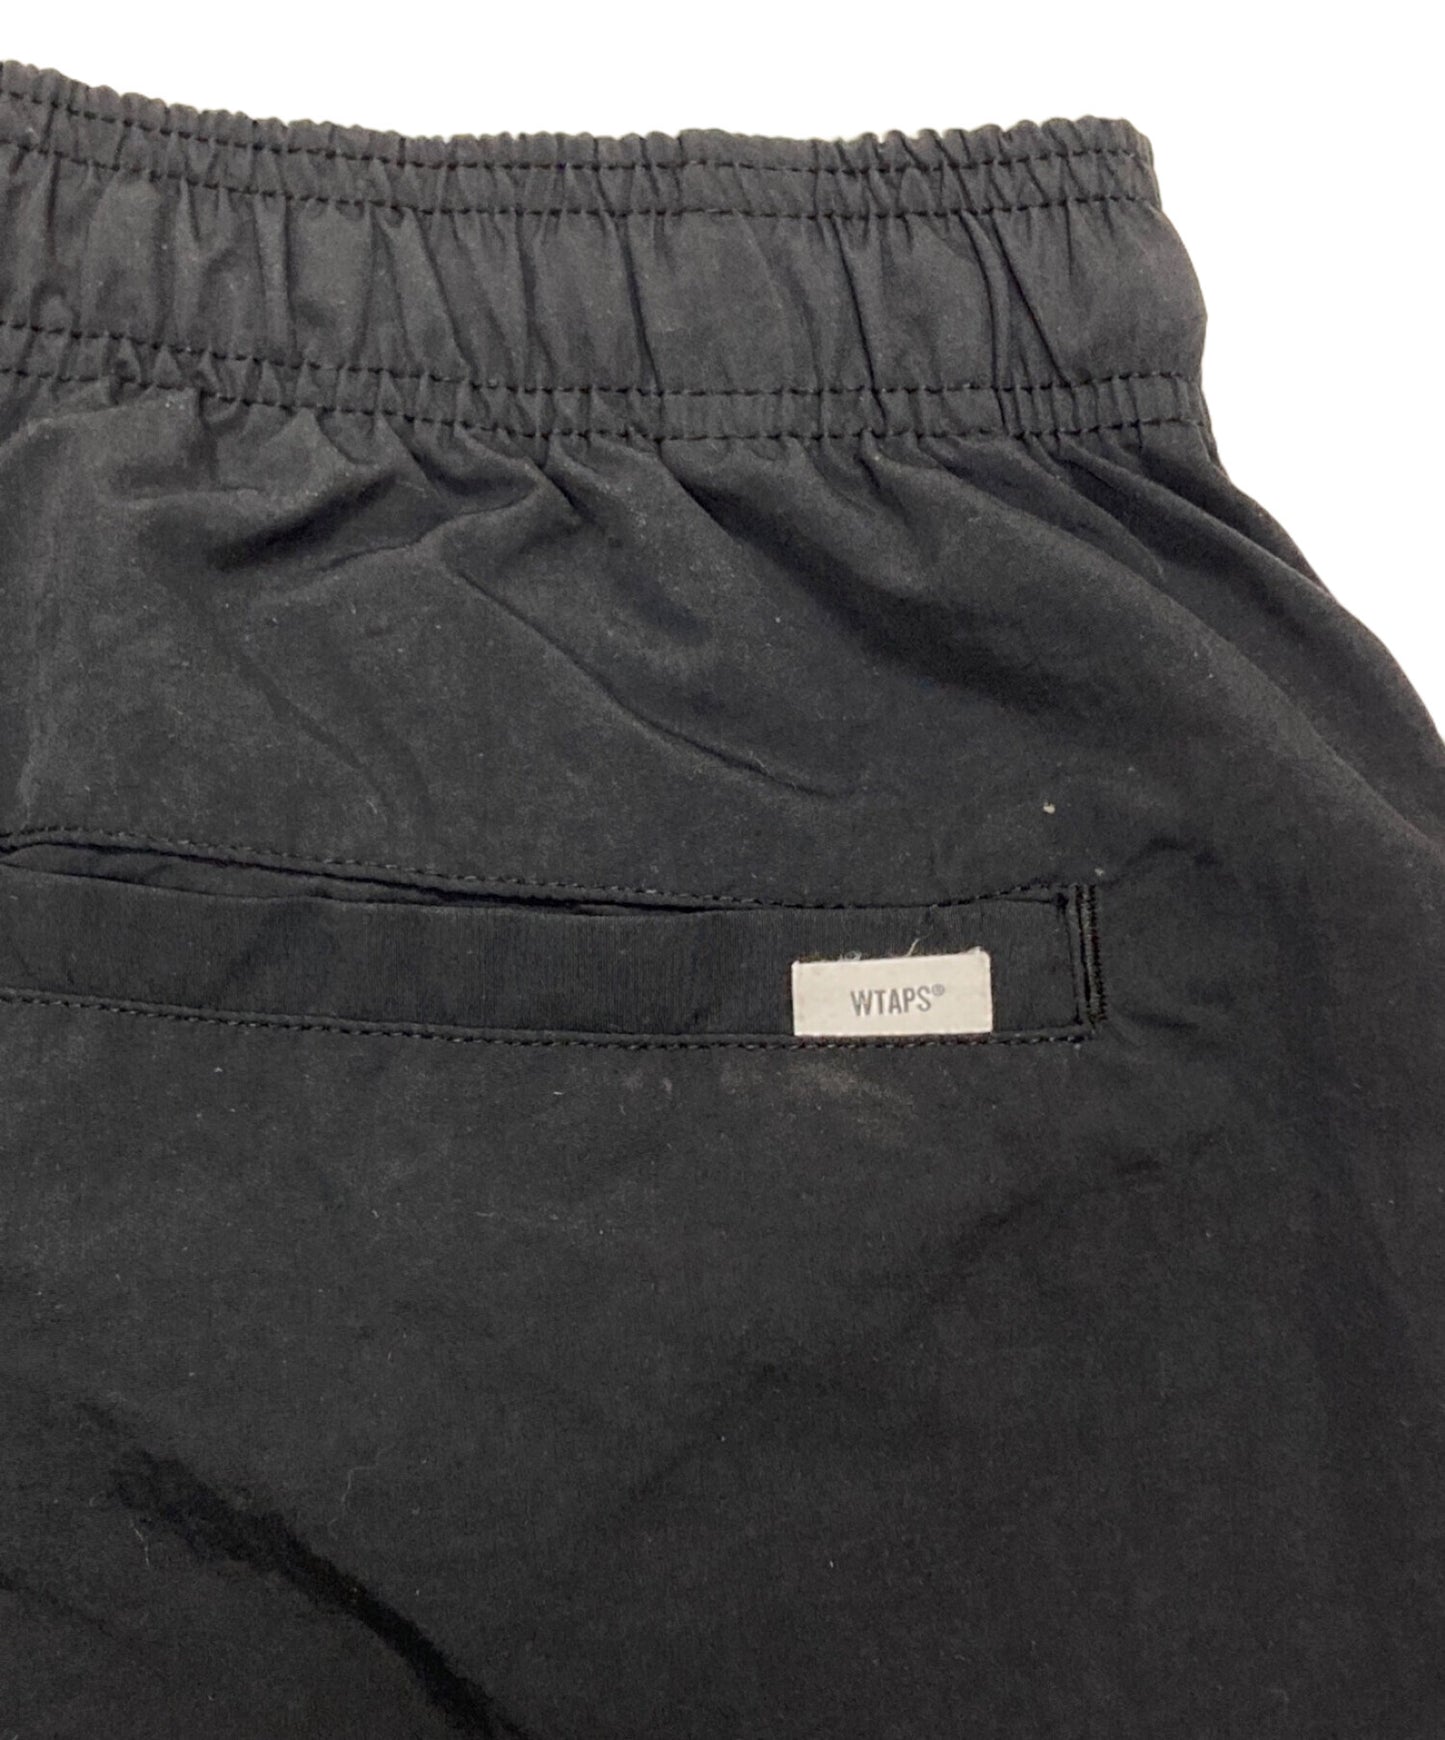 [Pre-owned] WTAPS PITCH TROUSERS/trousers/pants 231brdt-ptm01